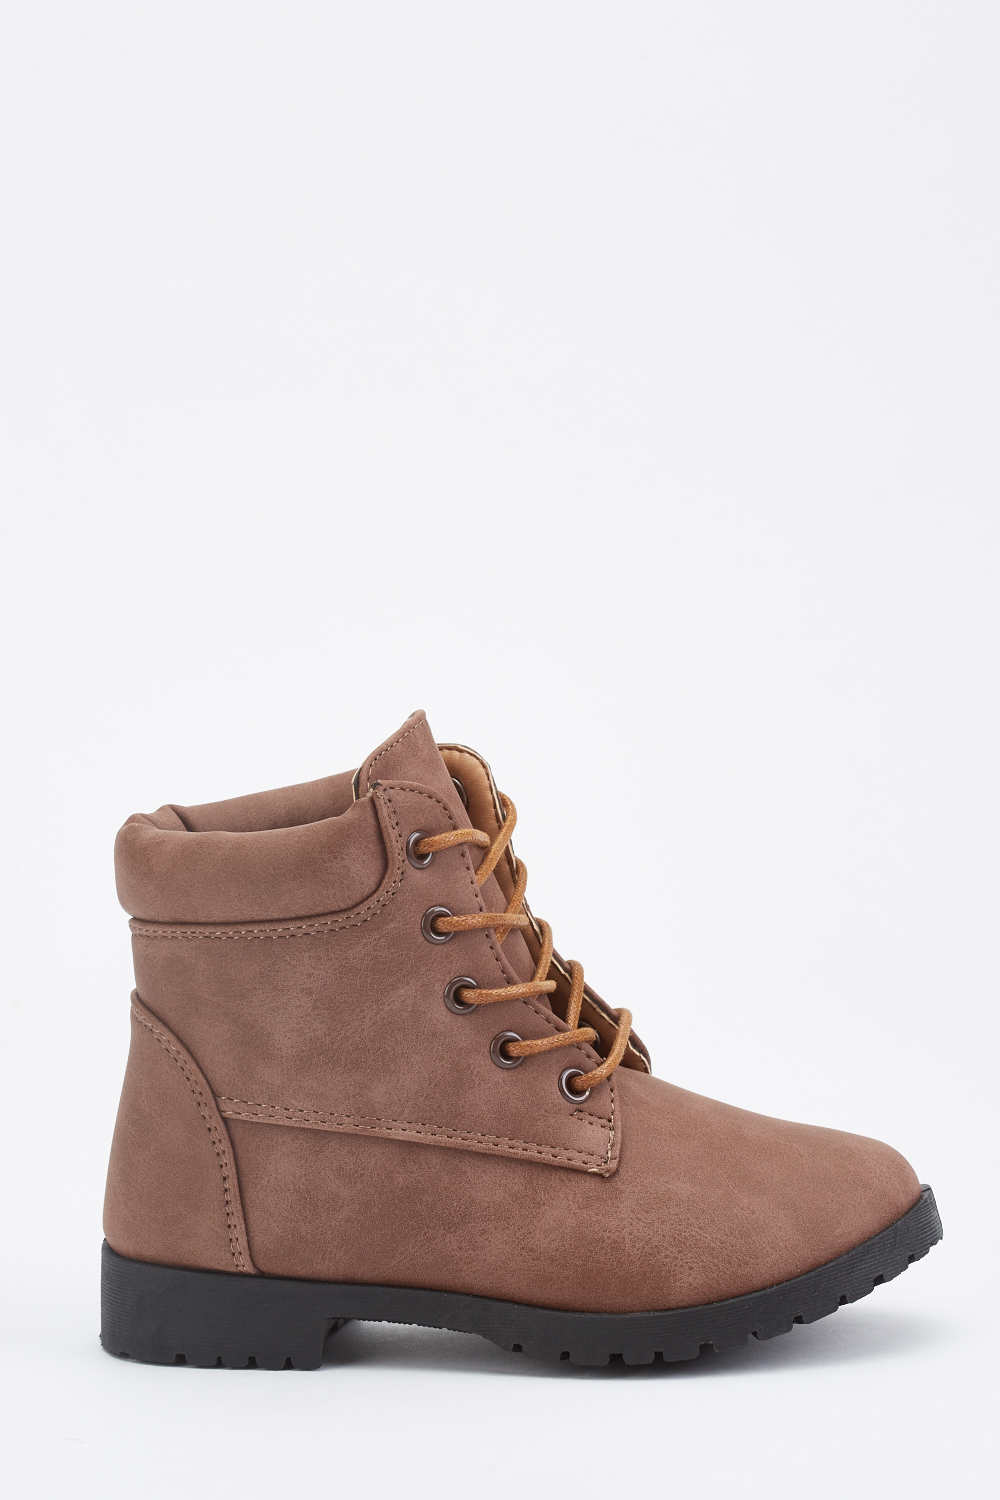 Kids Lace Up Ankle Boots - Just $6